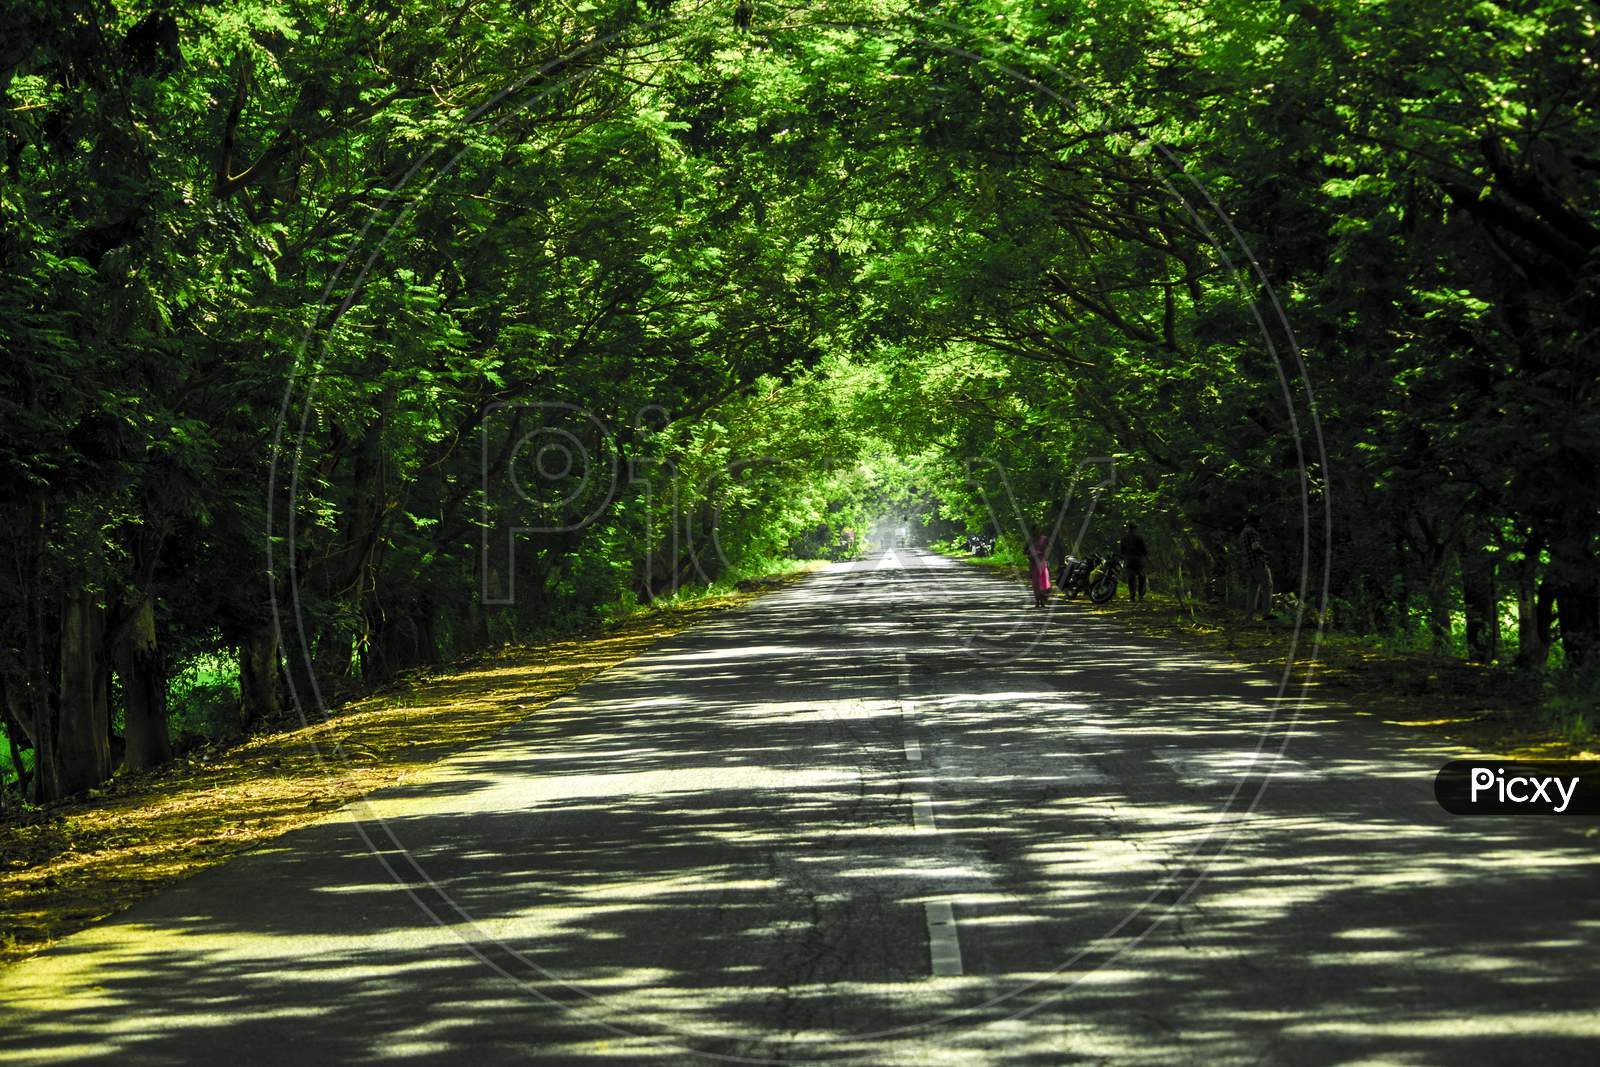 Canopy Of Green Trees  Over a Rural Village Roads With Asphalt Road Lines